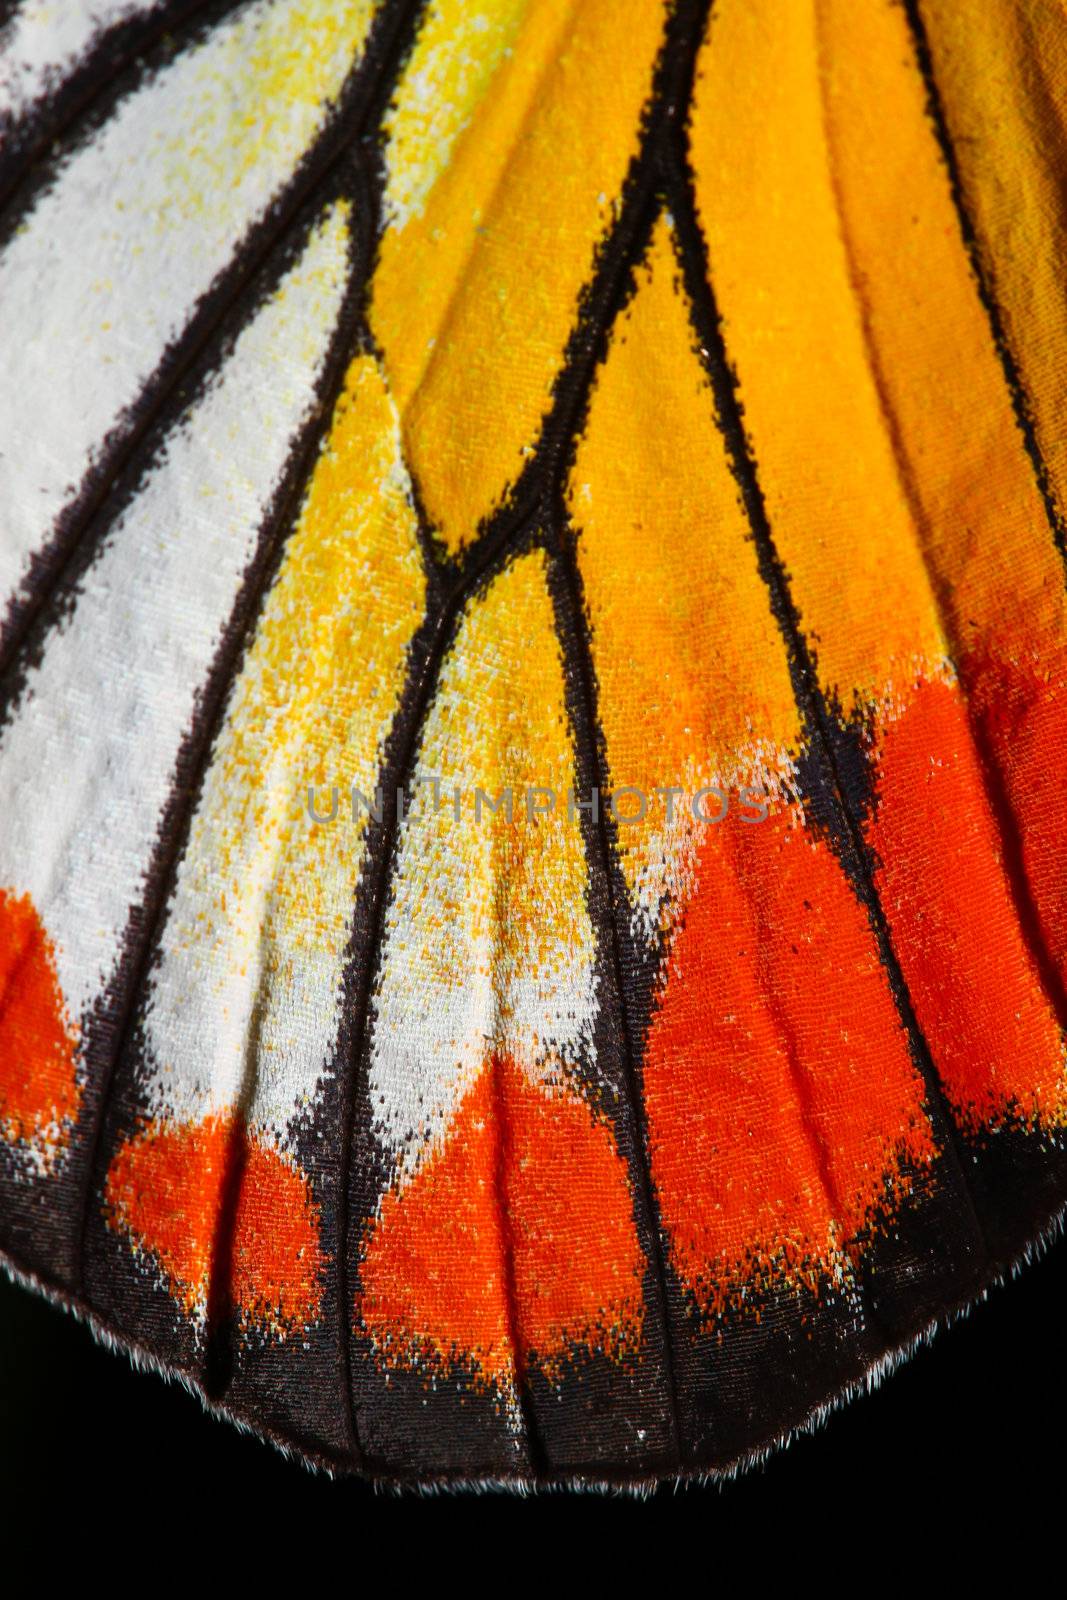 Butterfly wing texture, close up of detail of butterfly wing for by bajita111122